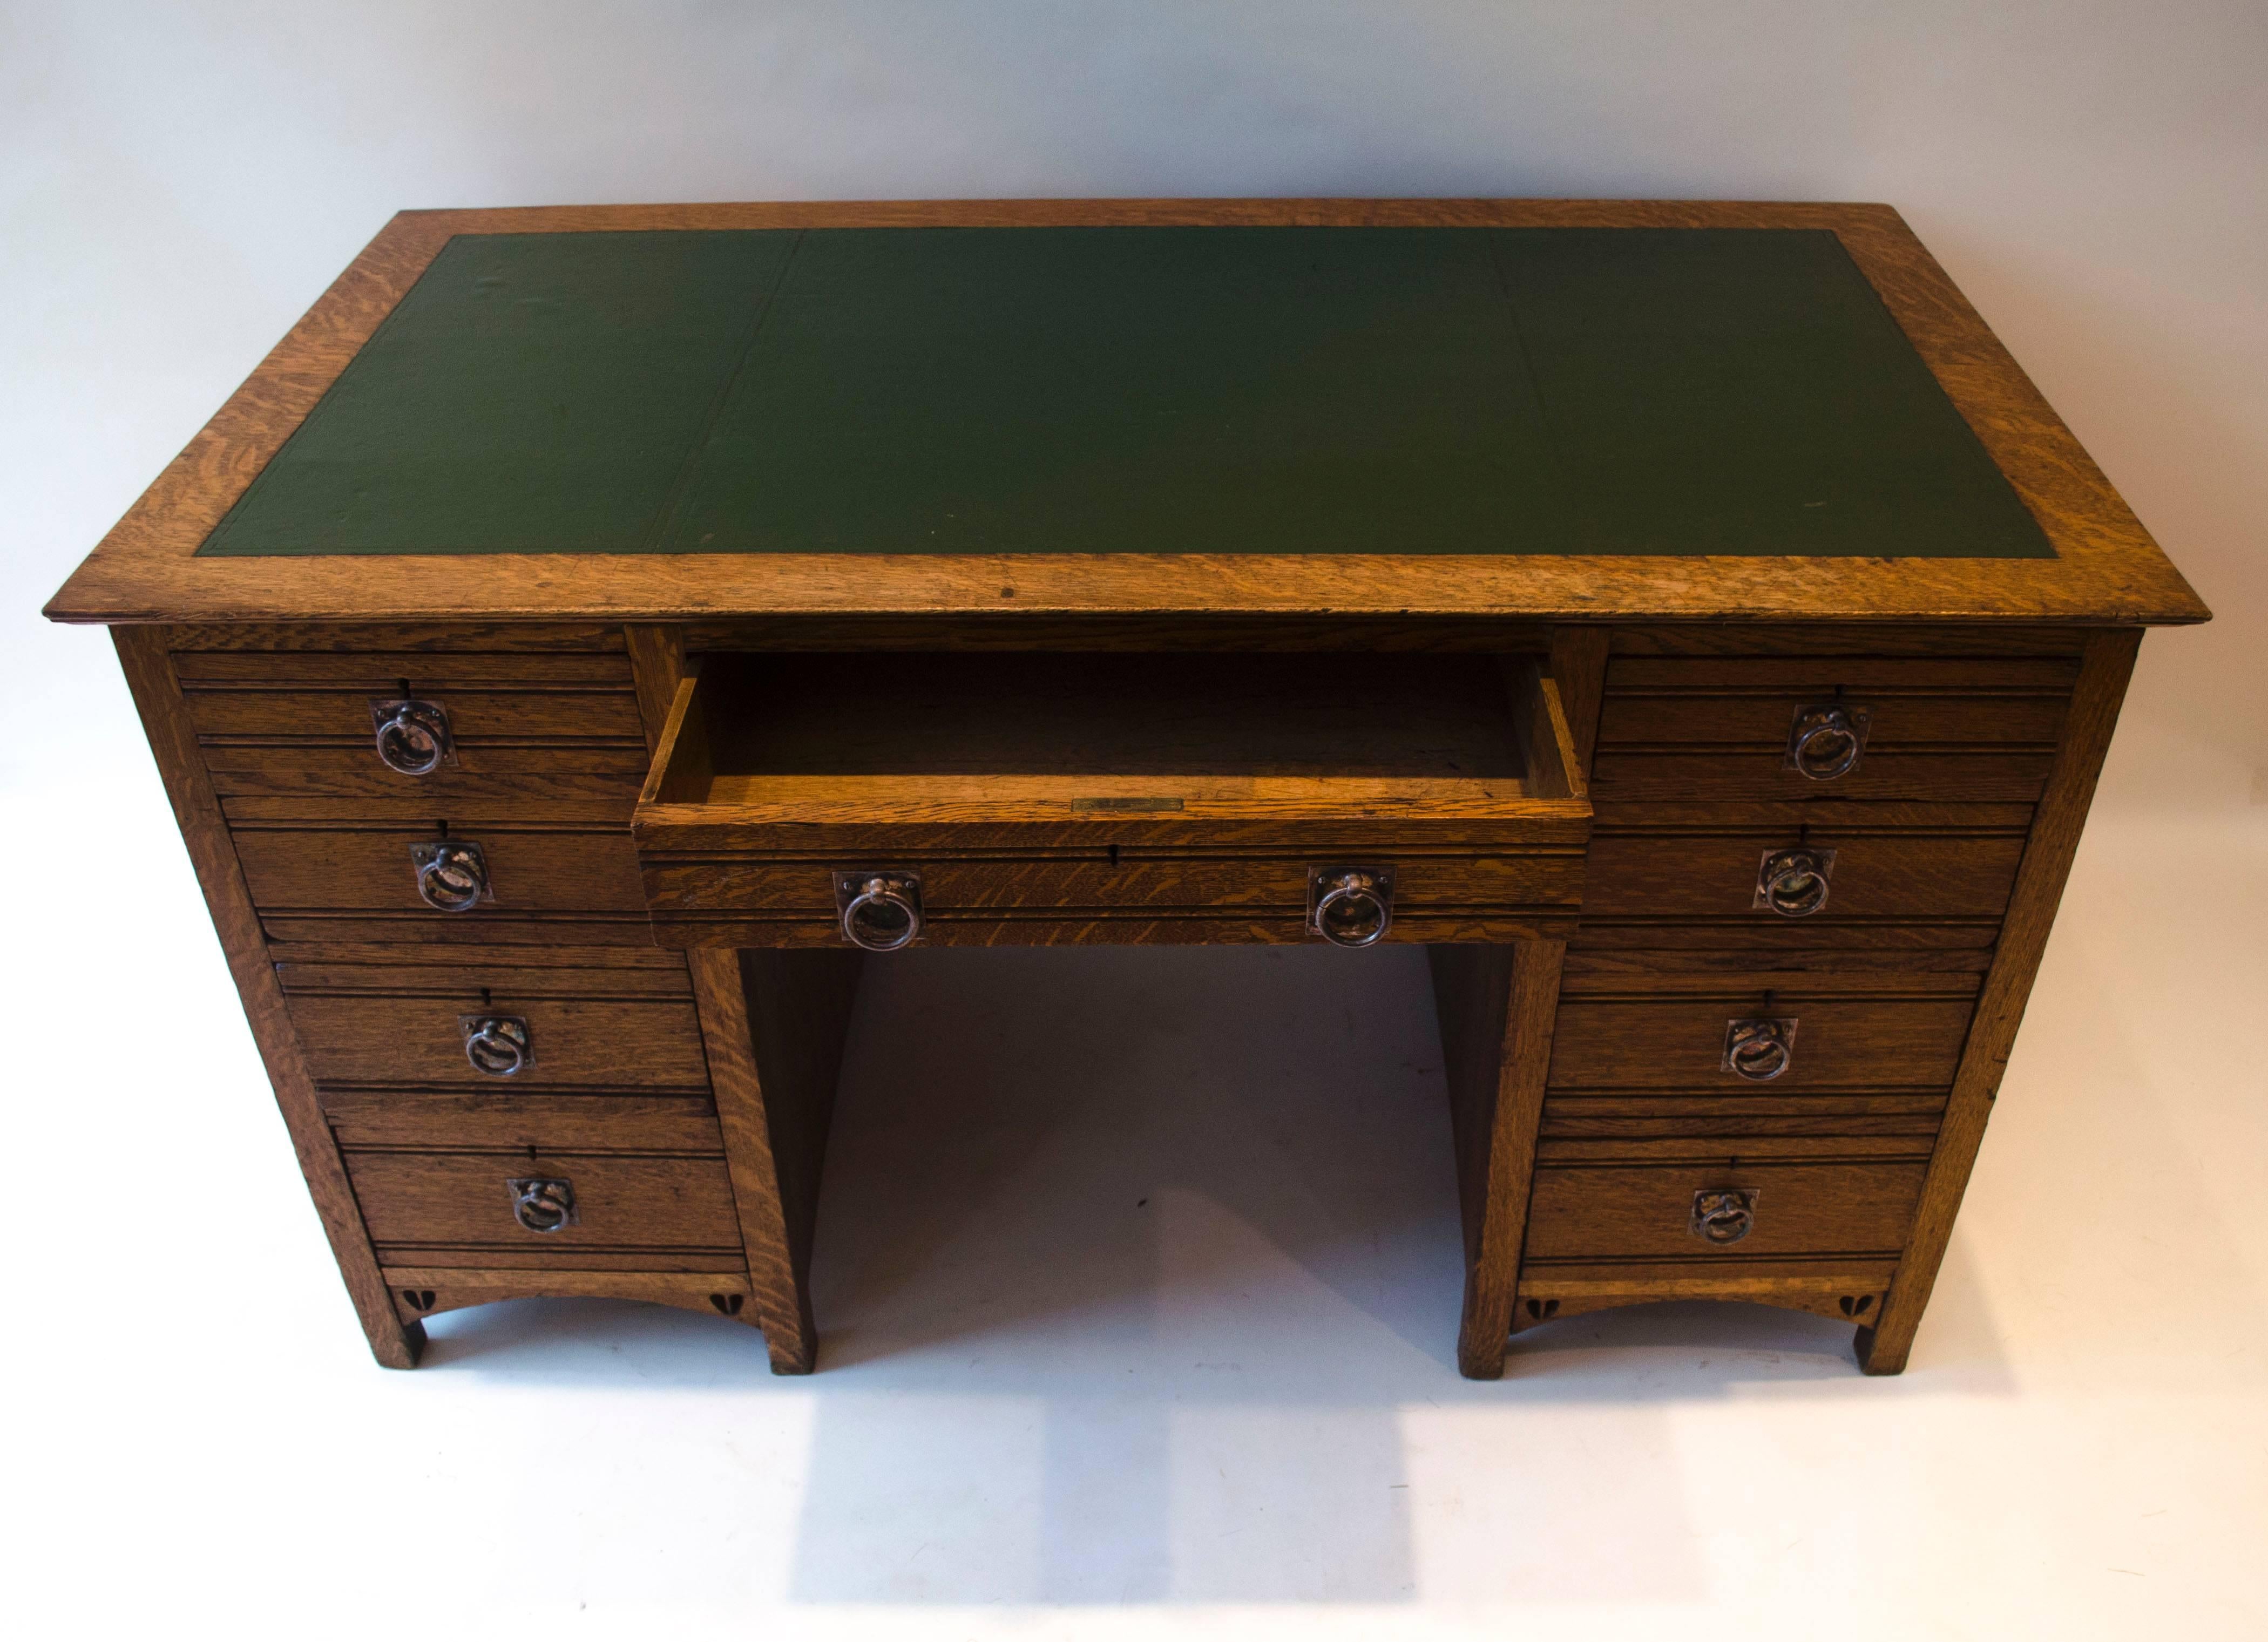 E. A. Taylor for Wylie and Lochhead. 
A pure Glasgow School oak twin pedestal desk with open writing area inset with green leather with tool-worked edges, a central upper drawer with sweeping curves pierced with Taylor's typical twin hearts to each